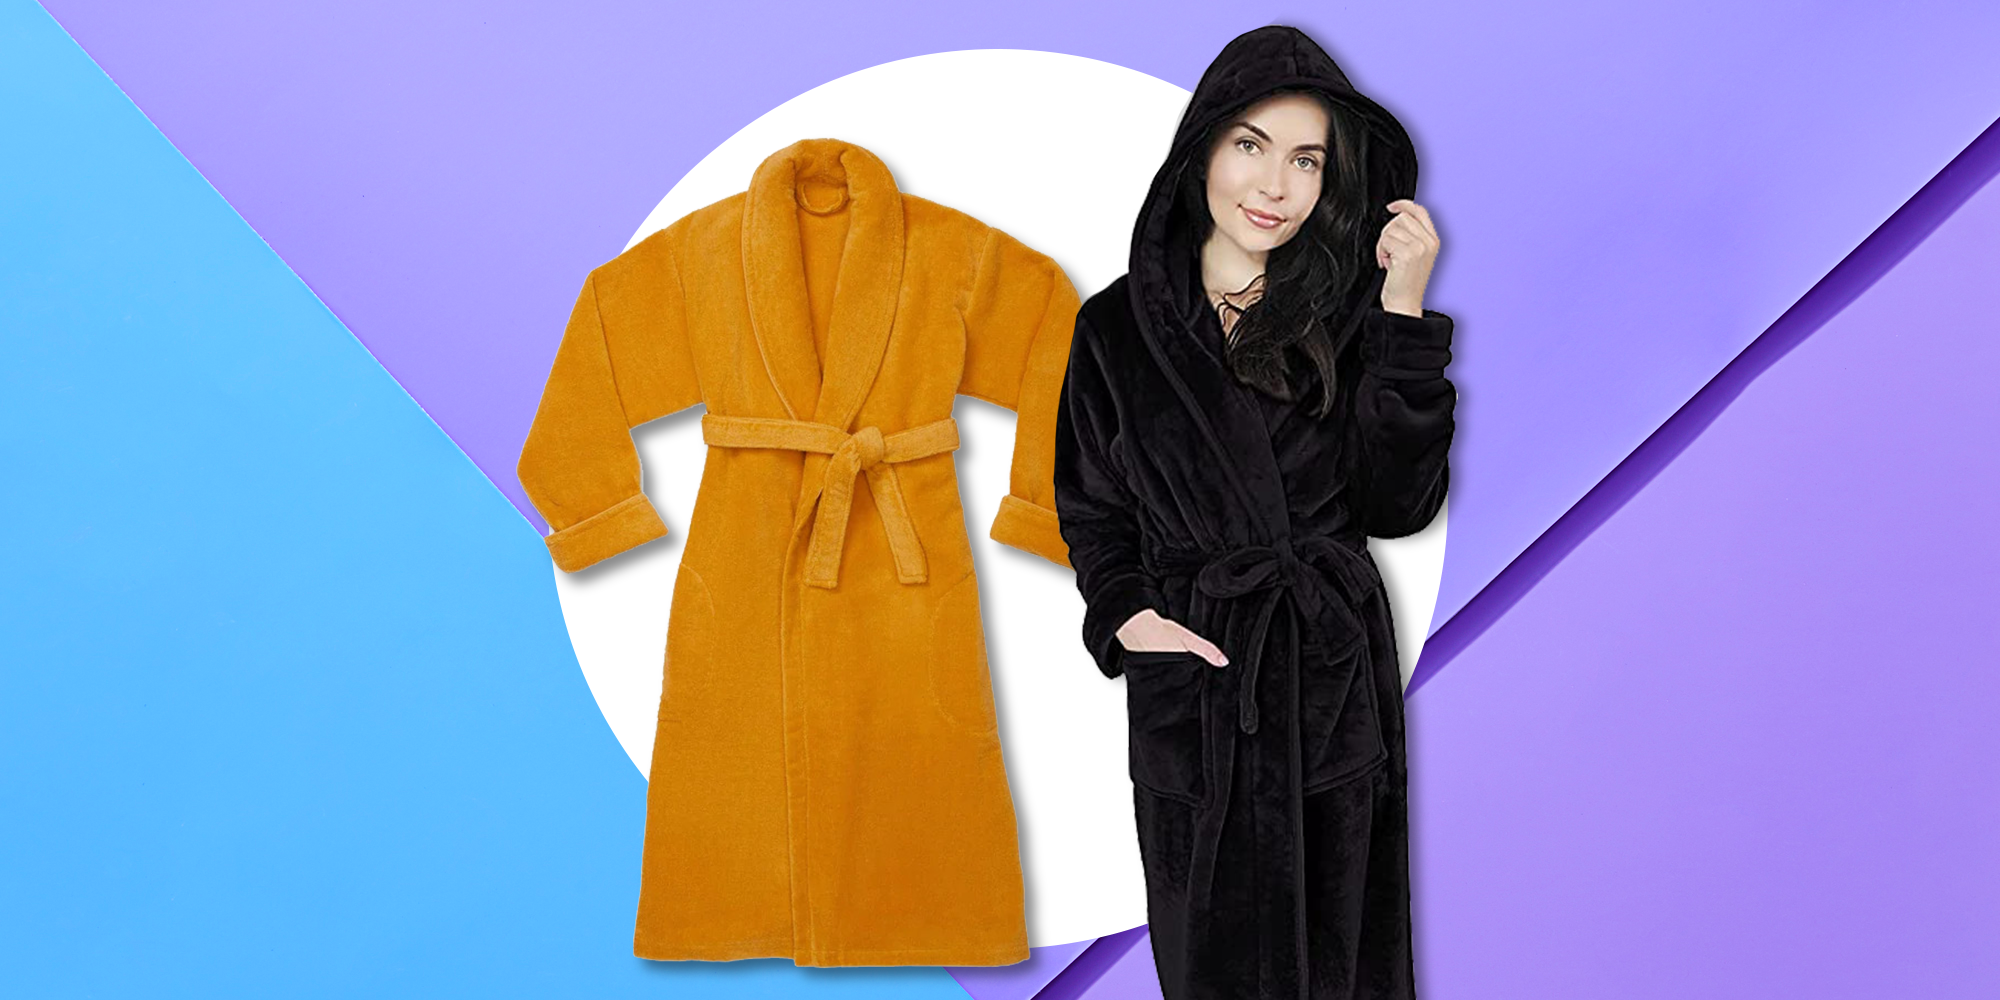 Dressing Gowns & Robes